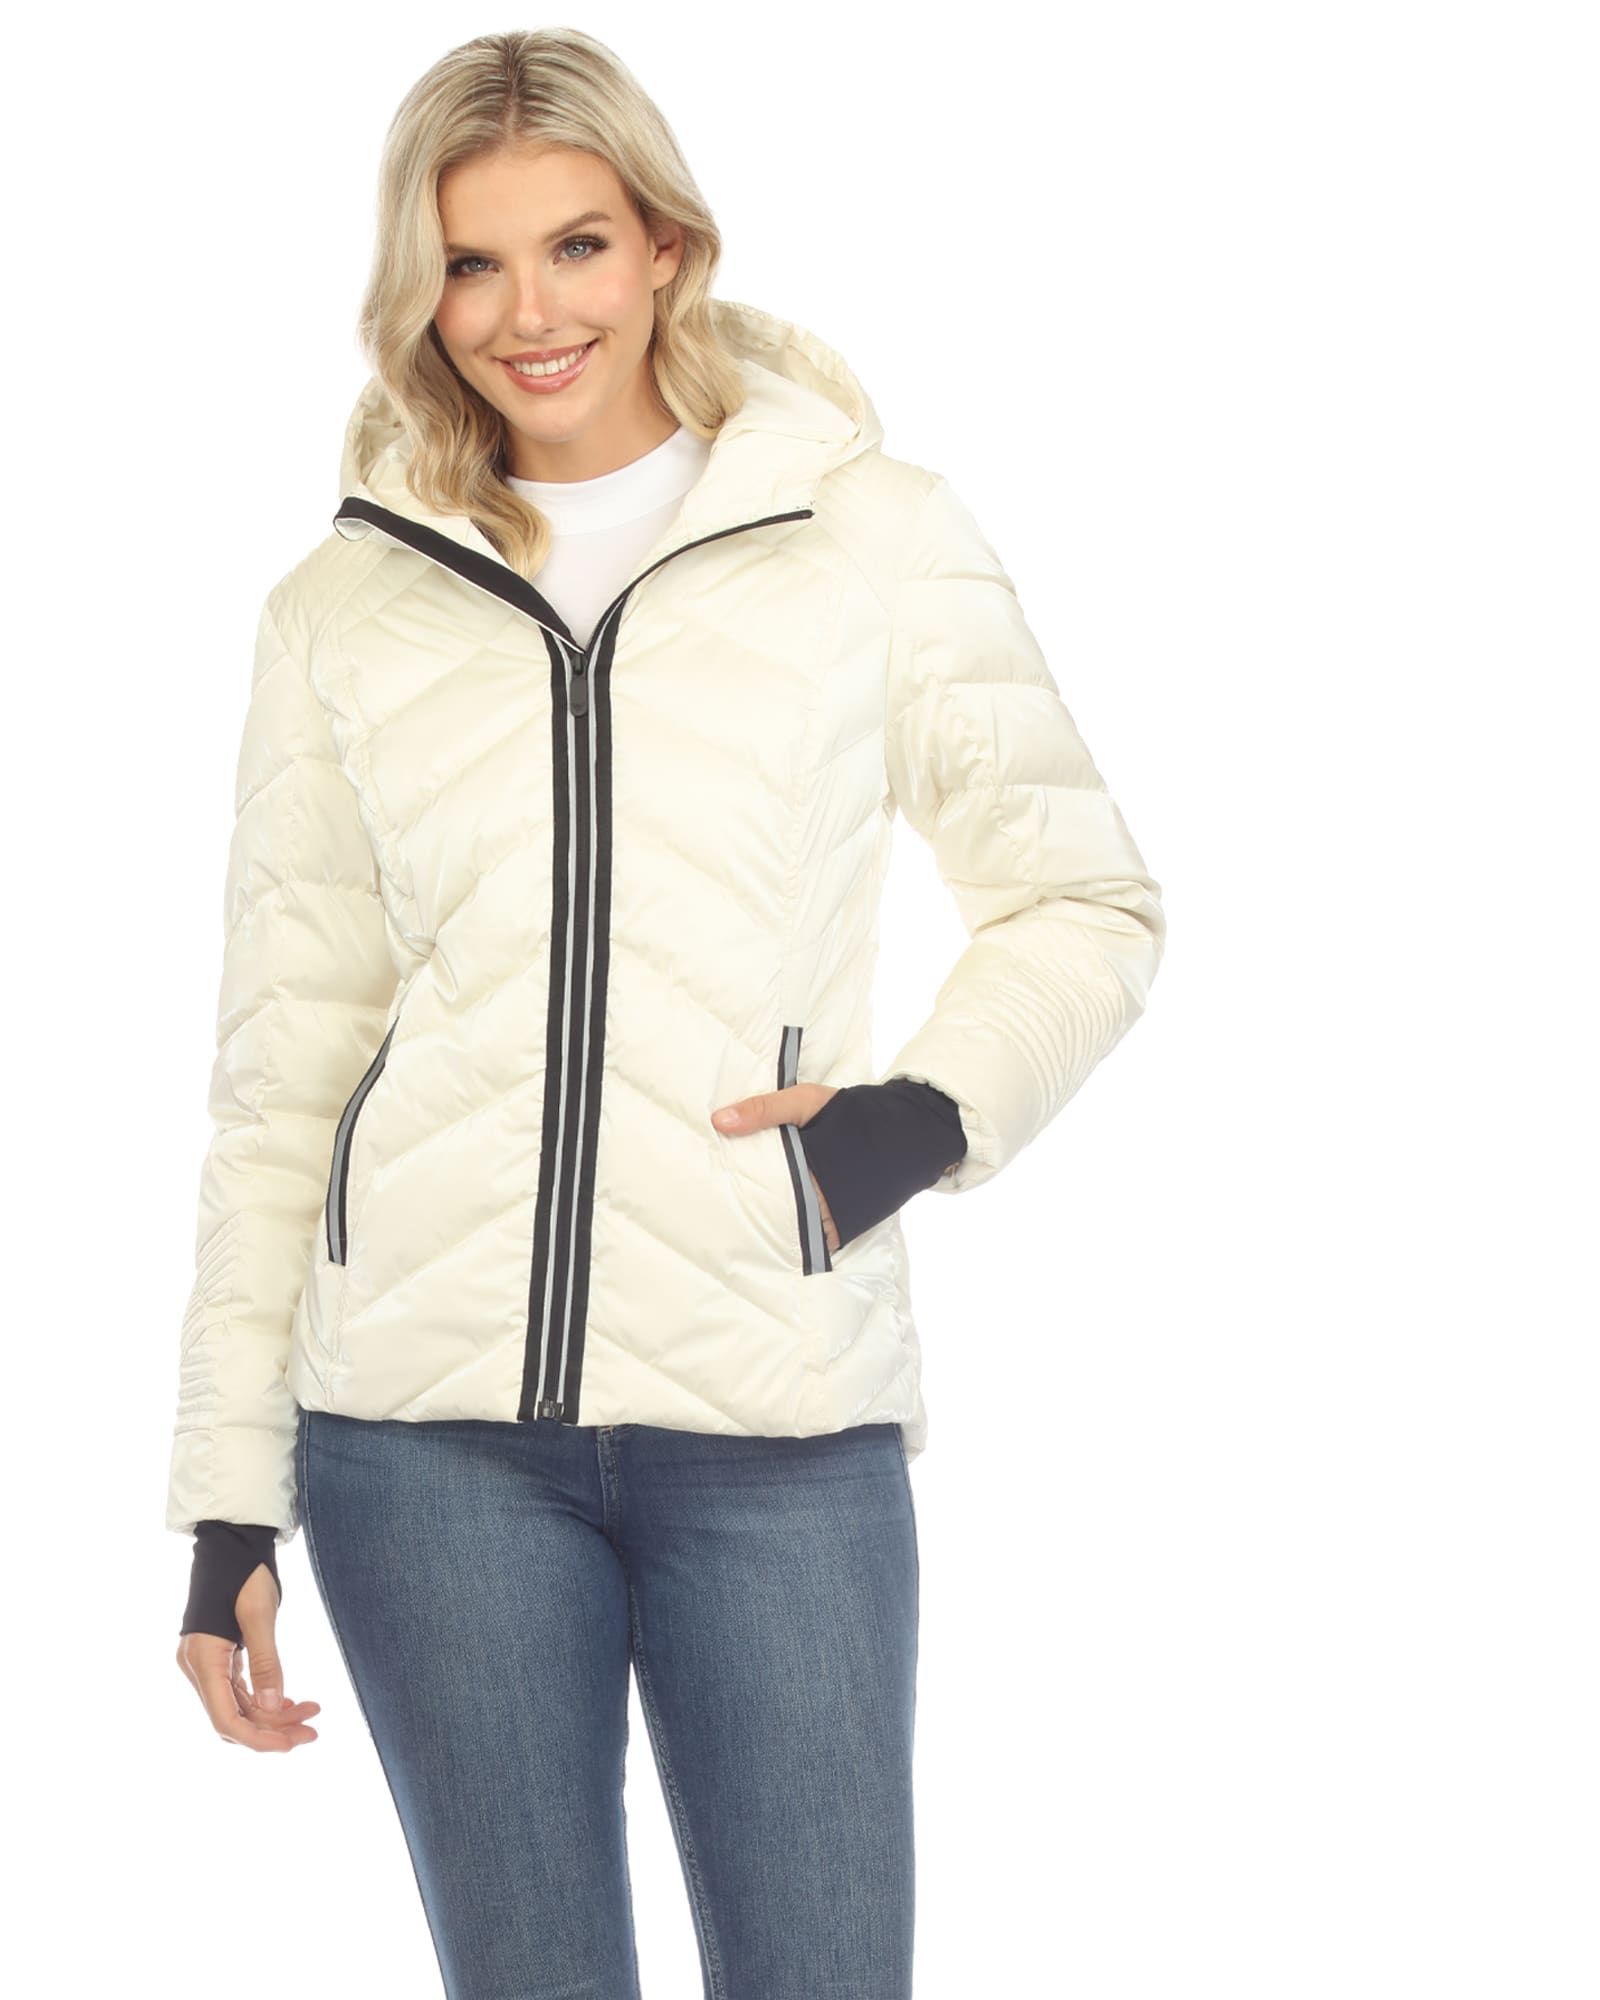 Women's Midweight Quilted Contrast With Thumbholes Hooded Jacket | White